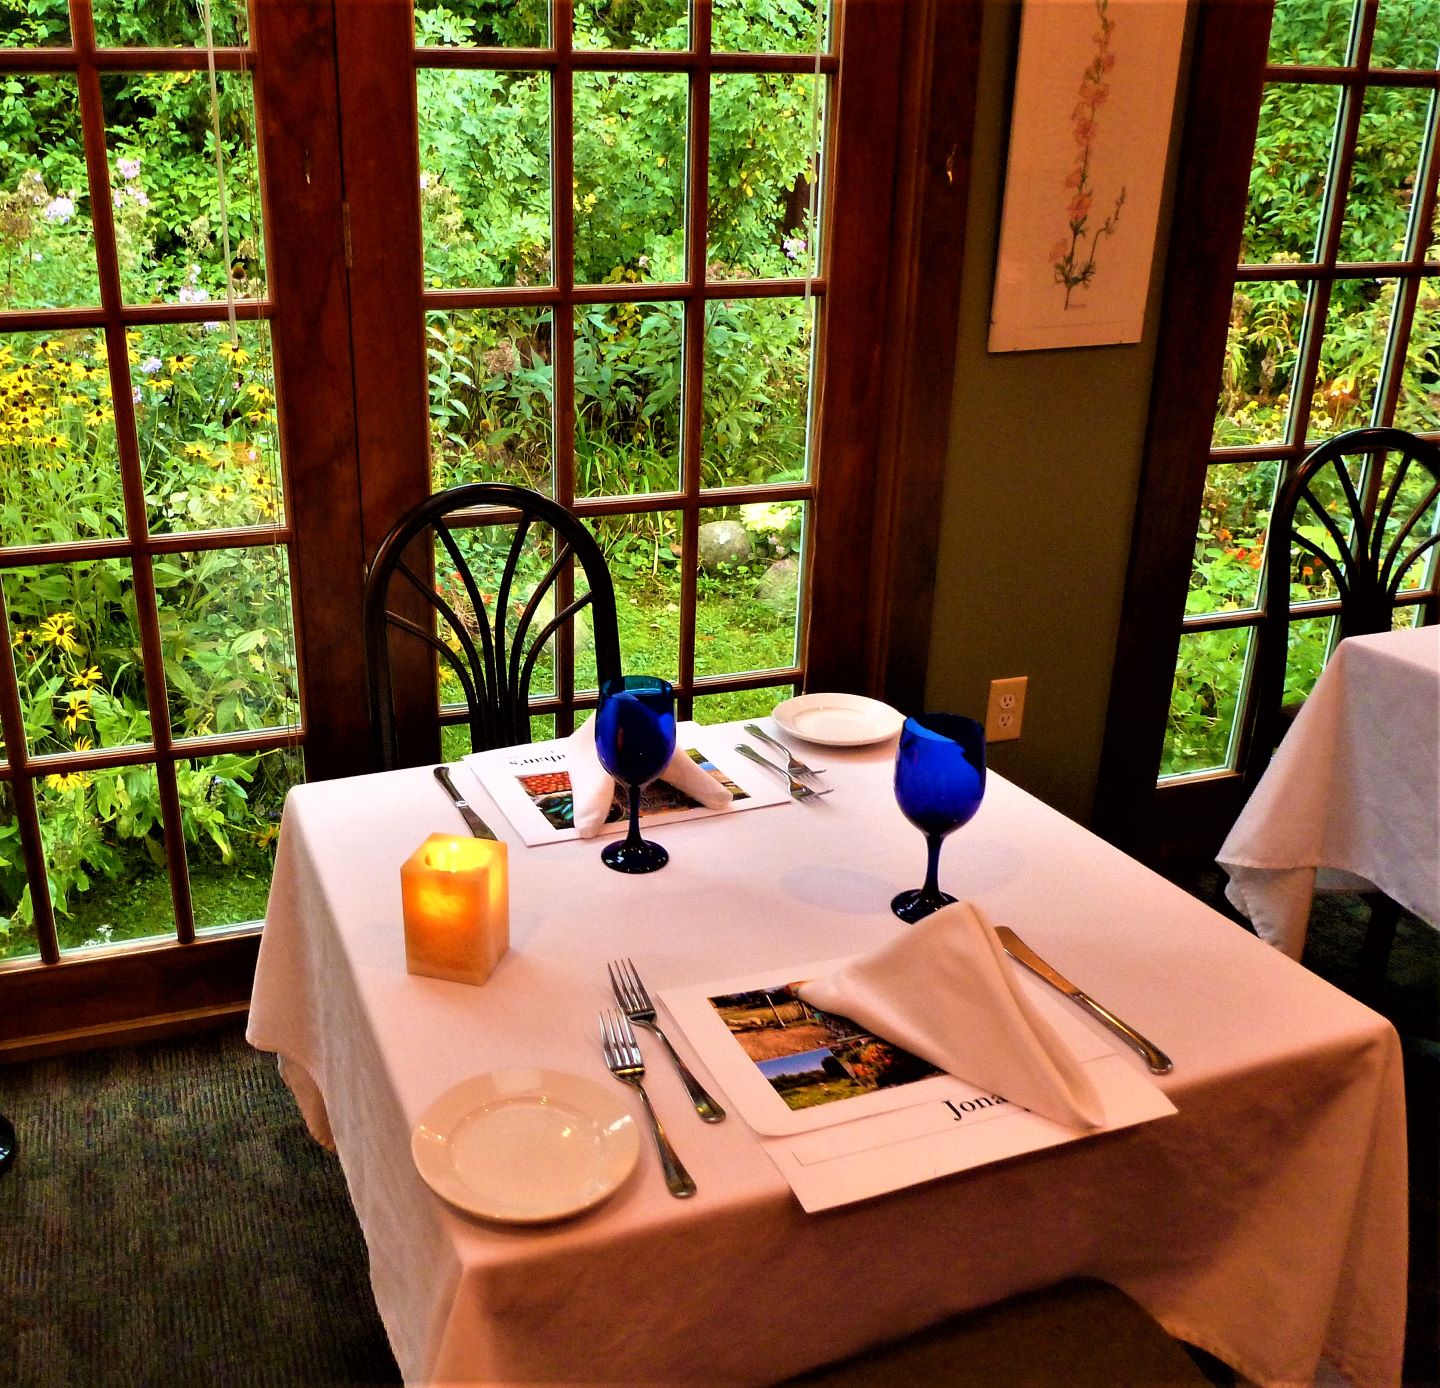 Dining room by the gardens at Jonathan's Restaurant in Ogunquit, Maine.